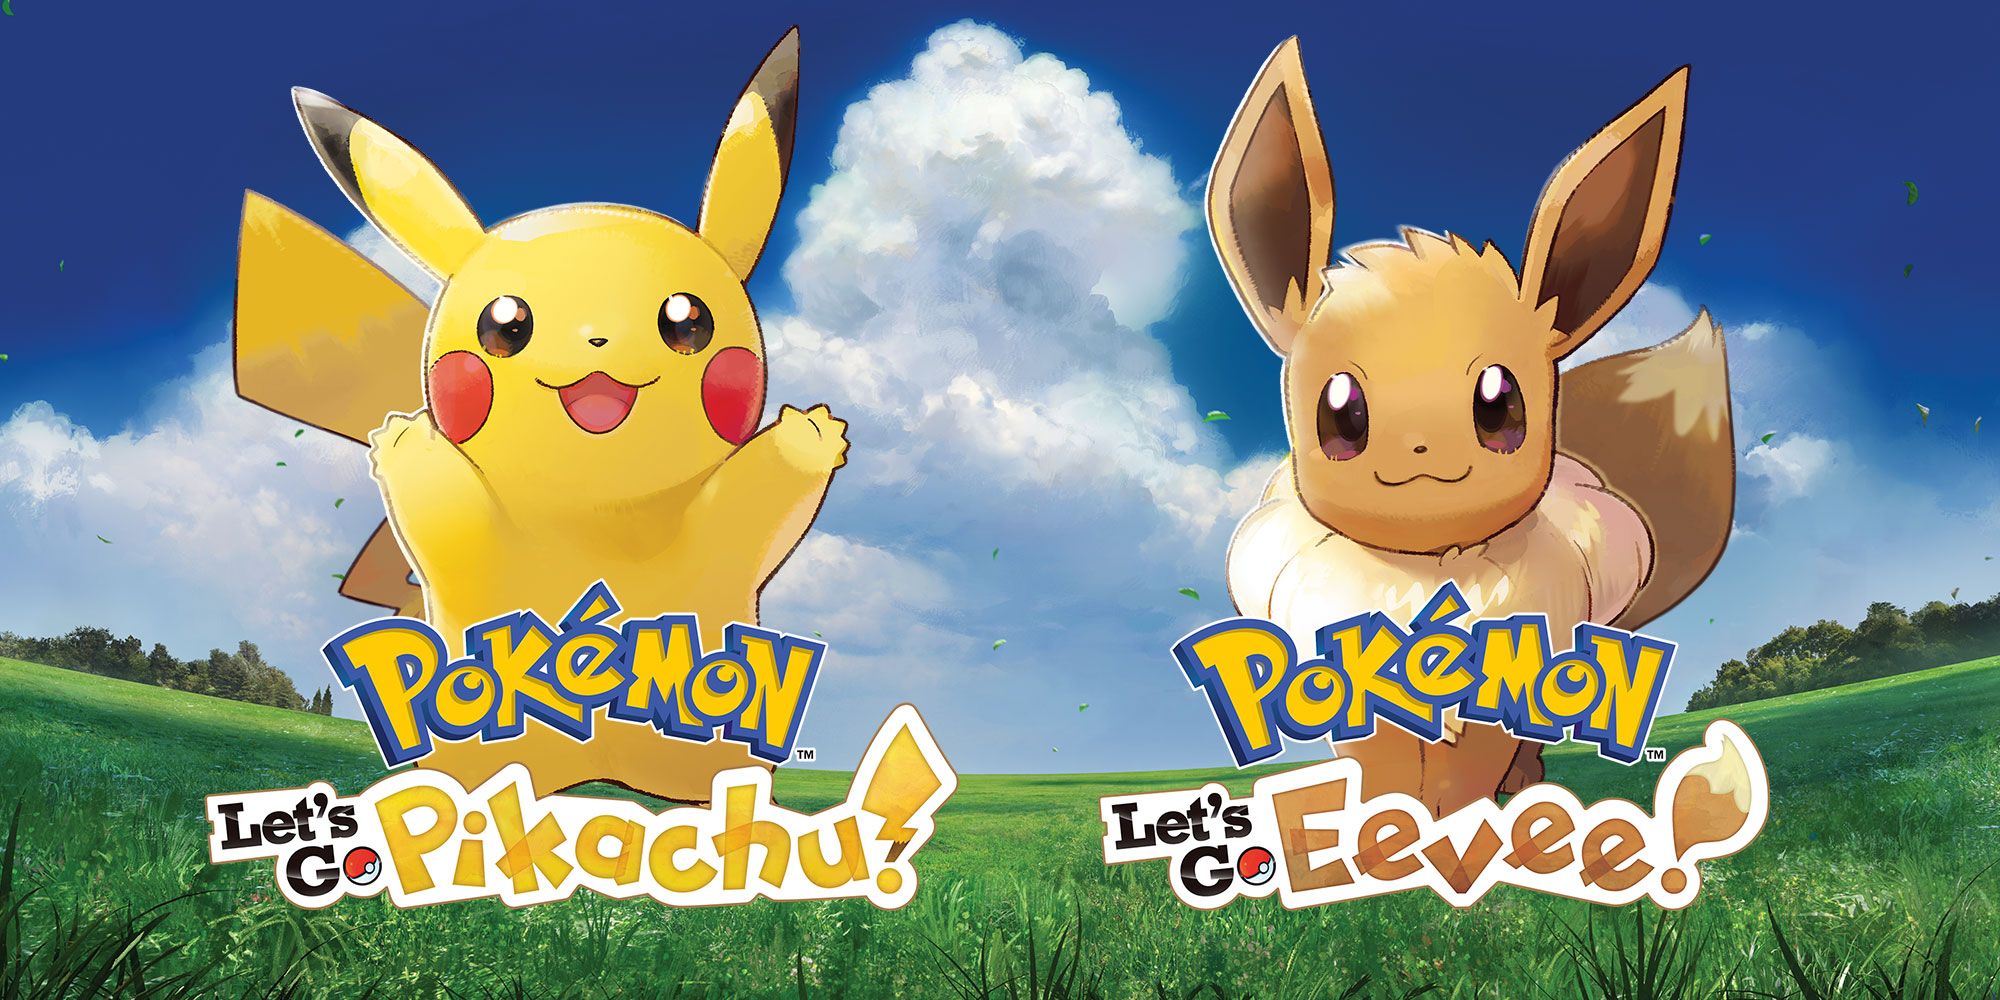 The logos for Pokémon: Let's Go, Pikachu! and Let's Go, Eevee, alongside their eponymous Pokémon, in front of a field of grass and a blue sky with large white clouds in the distance.